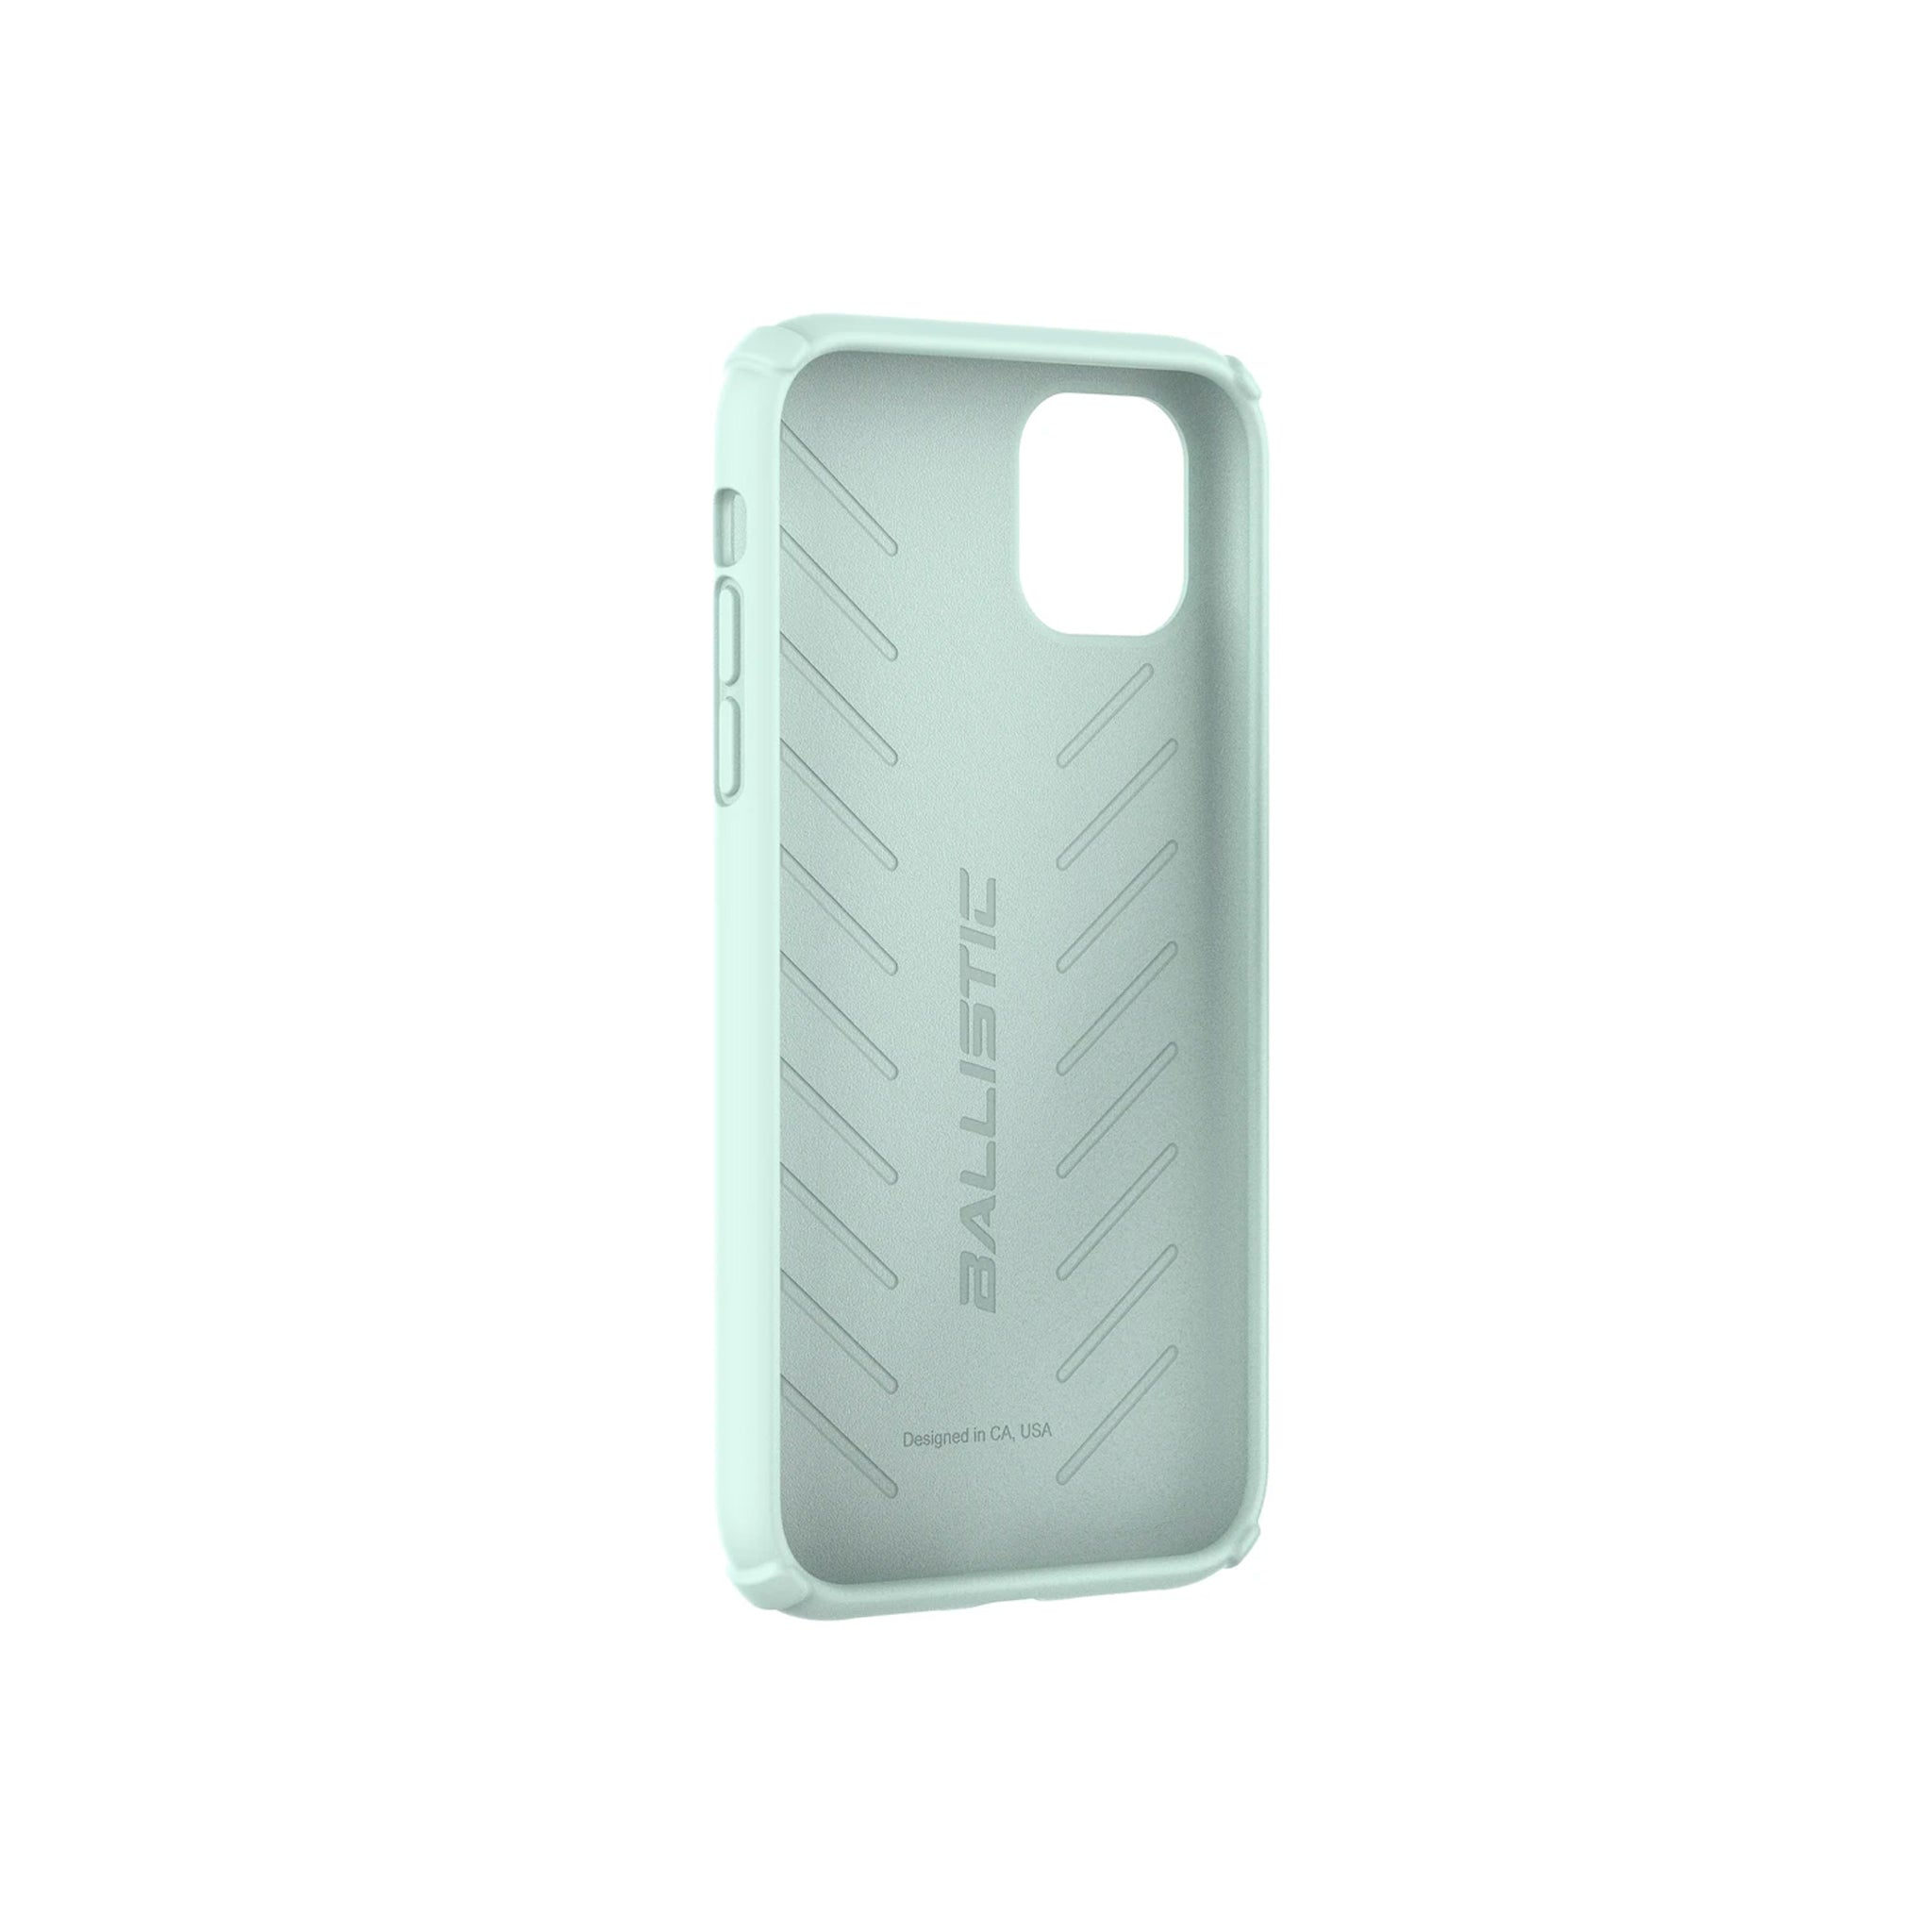 Ballistic - Soft Jacket Series for Appe iPhone 11 - Teal